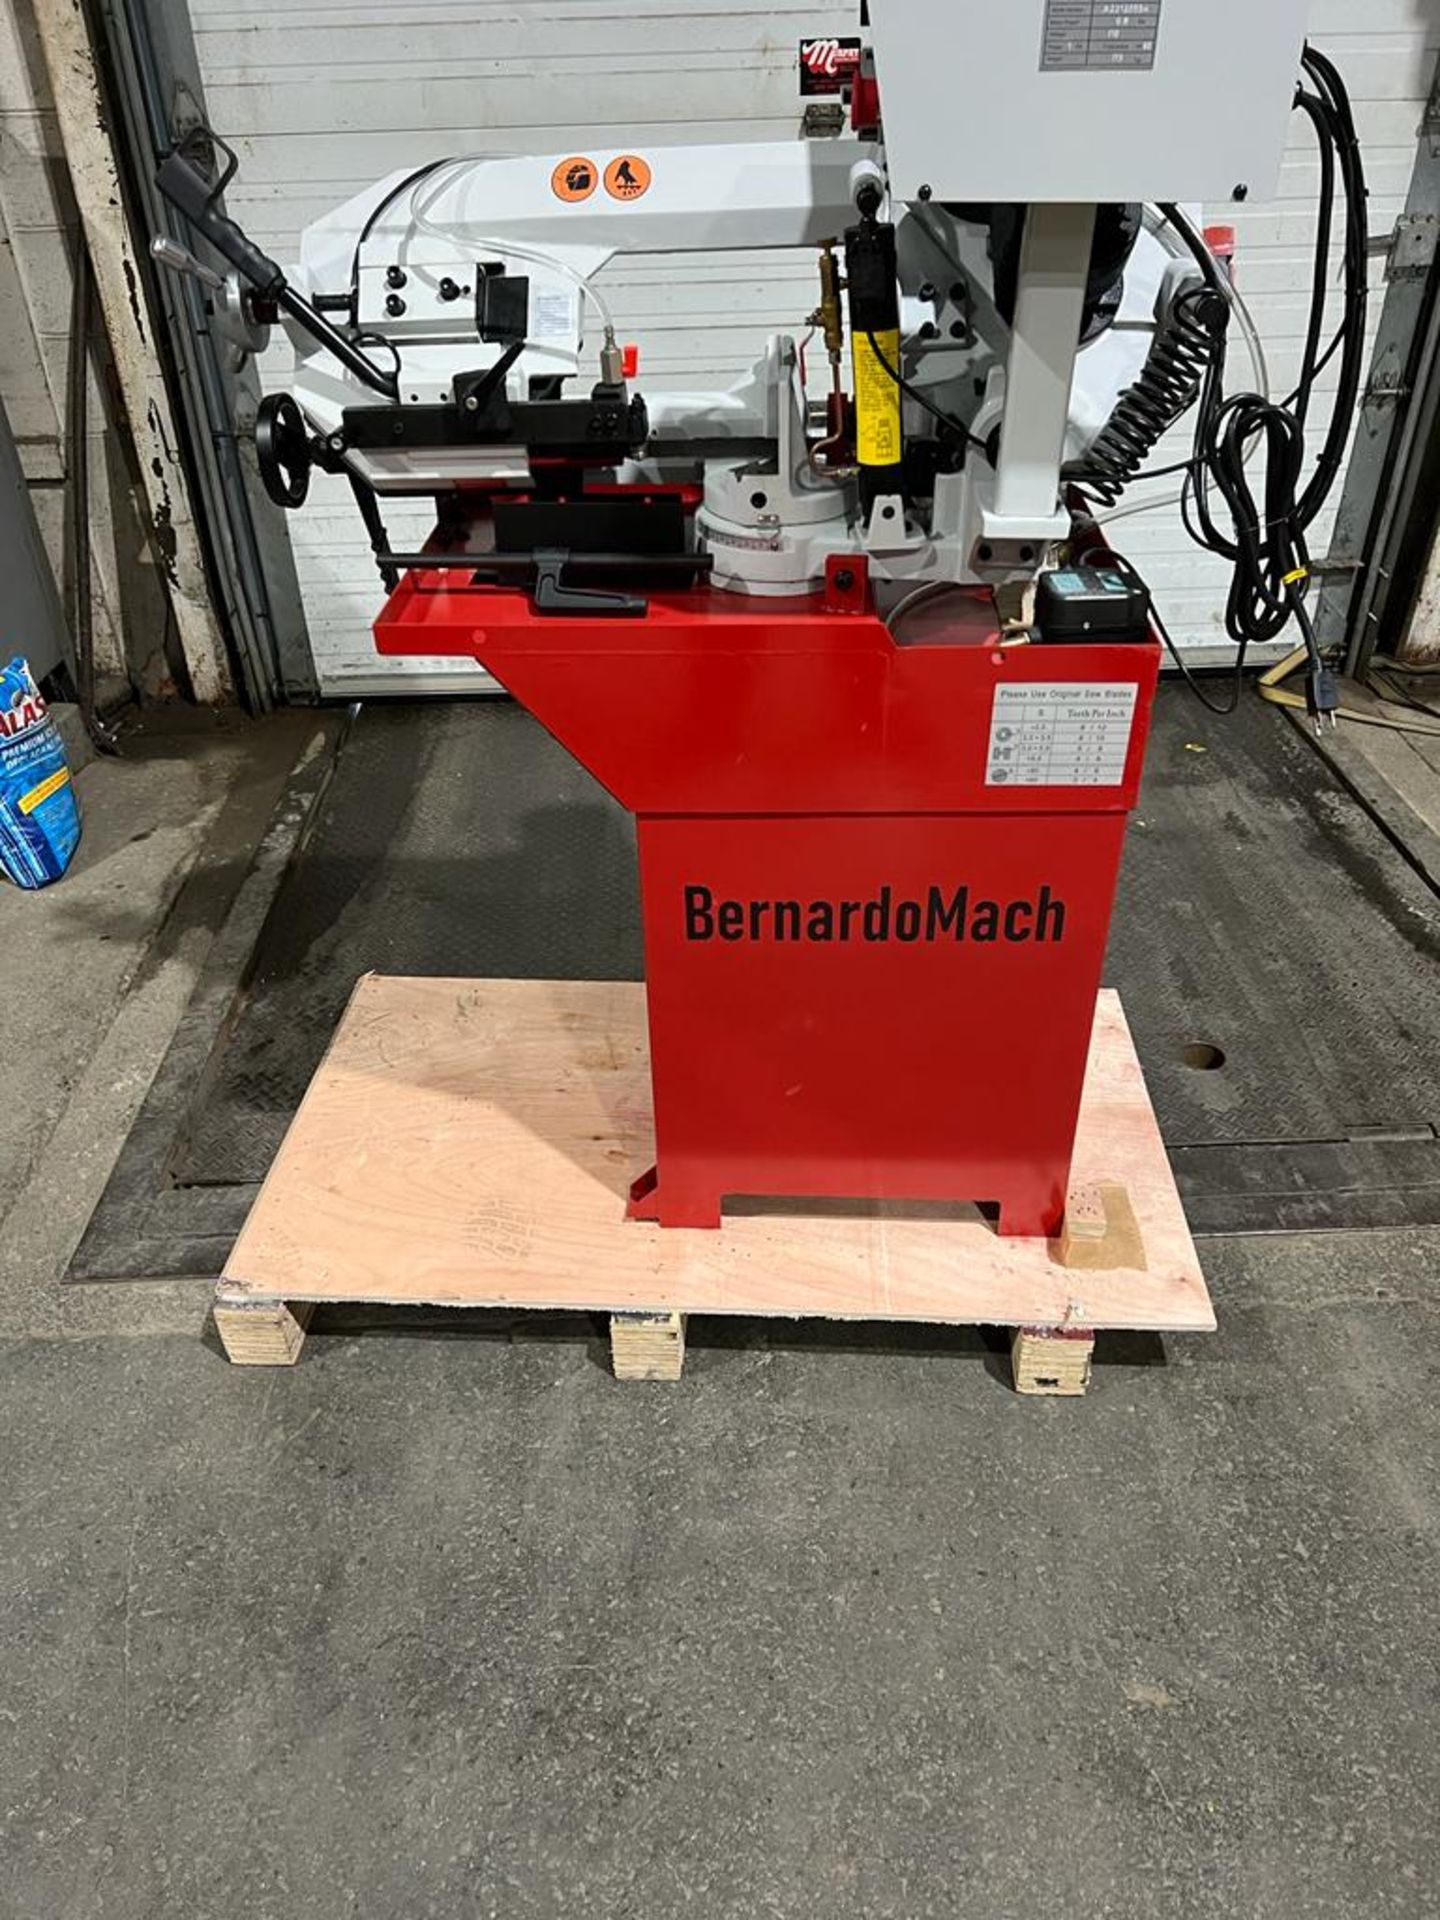 BernardoMach Horizontal Band Saw - GEAR DRIVEN MOTOR with POWER HEAD with Automatic & Manual cut - - Image 4 of 5